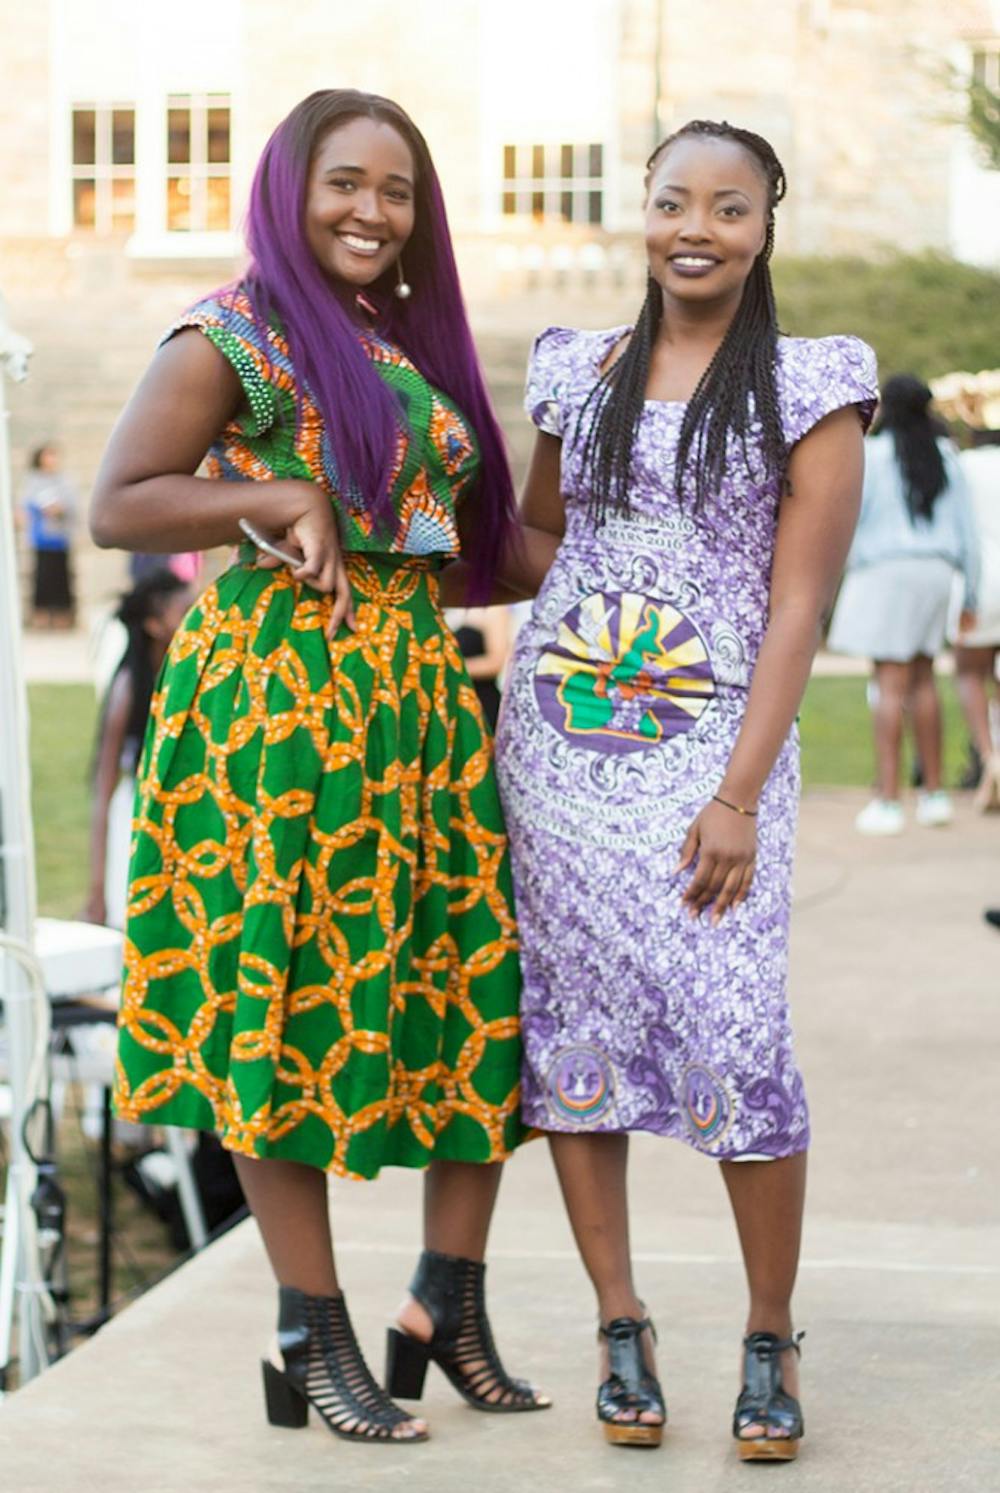 <p>Africa Day celebrates&nbsp;Africa’s transformative history through cultural activities like fashion shows, readings and dance performances.</p>